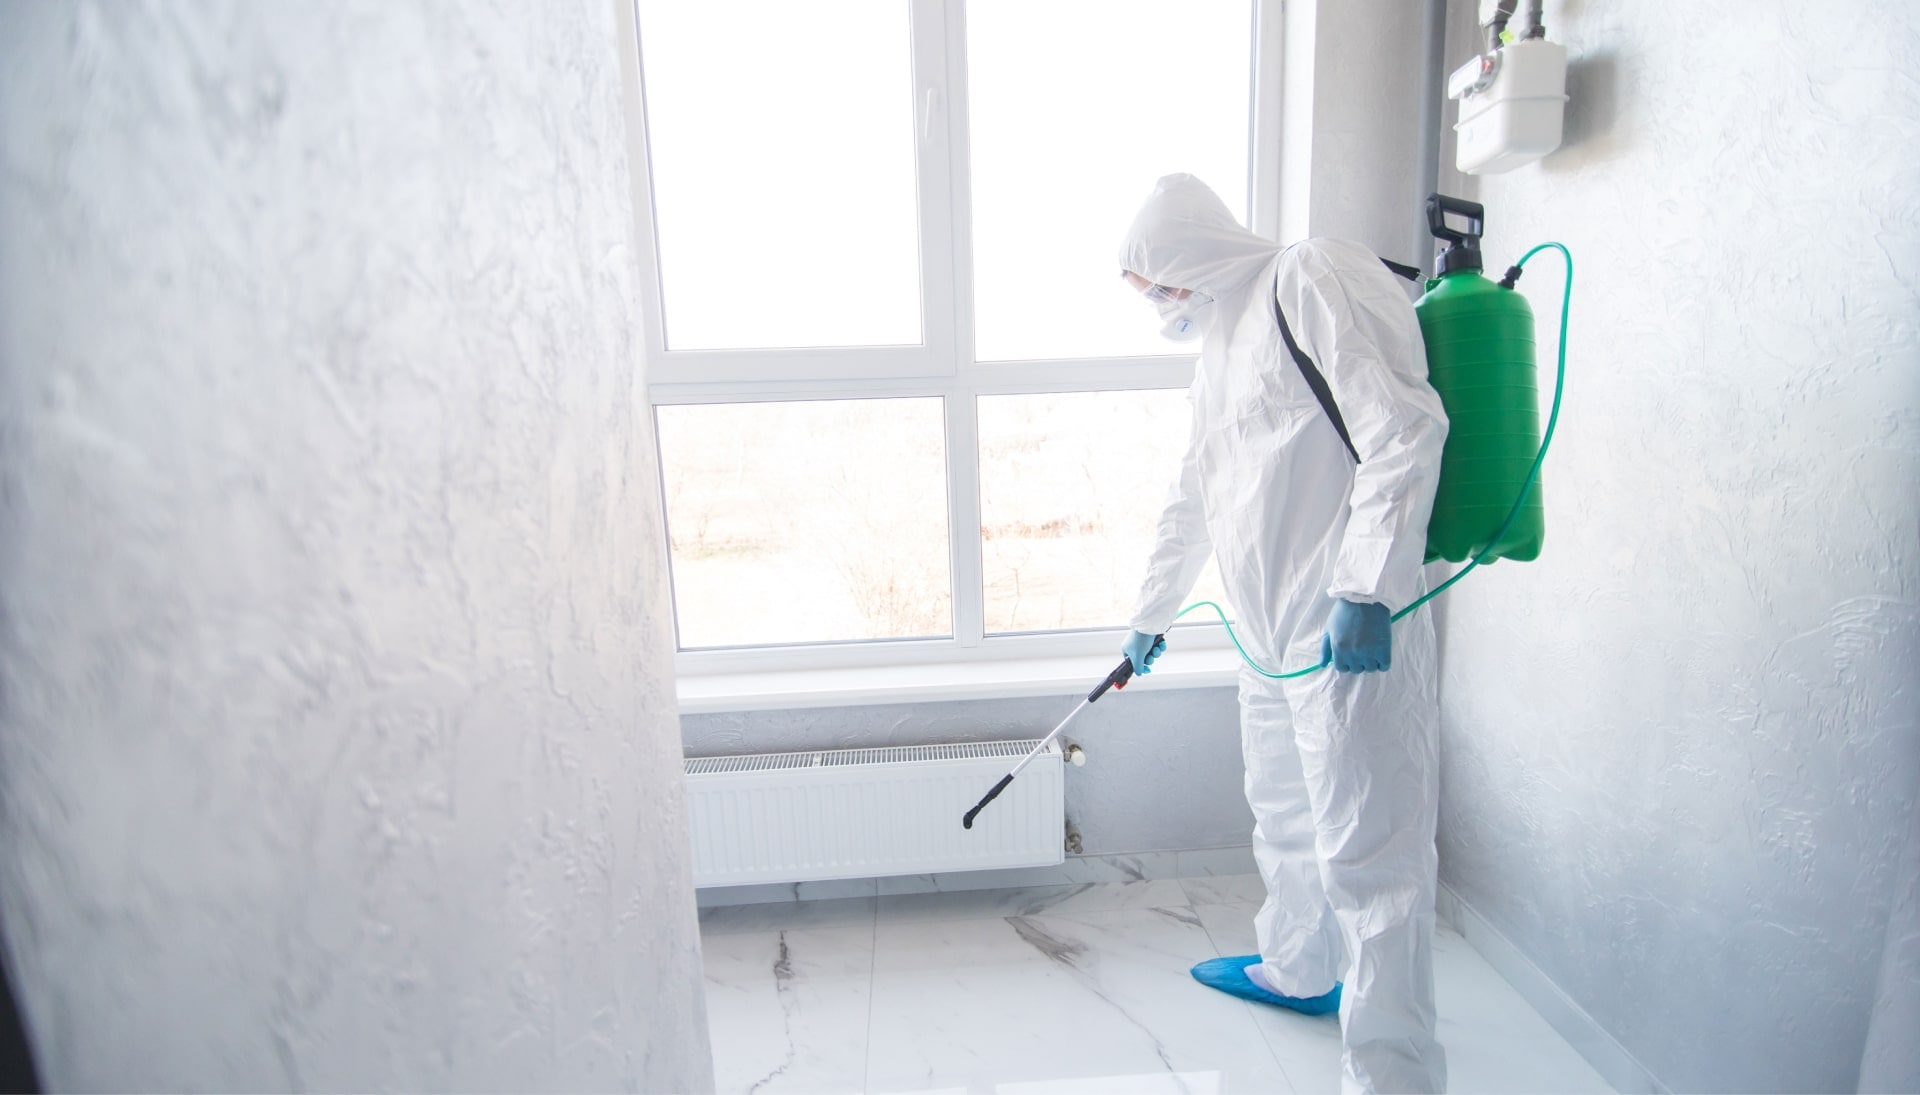 We provide the highest-quality mold inspection, testing, and removal services in the Kansas City, Missouri area.